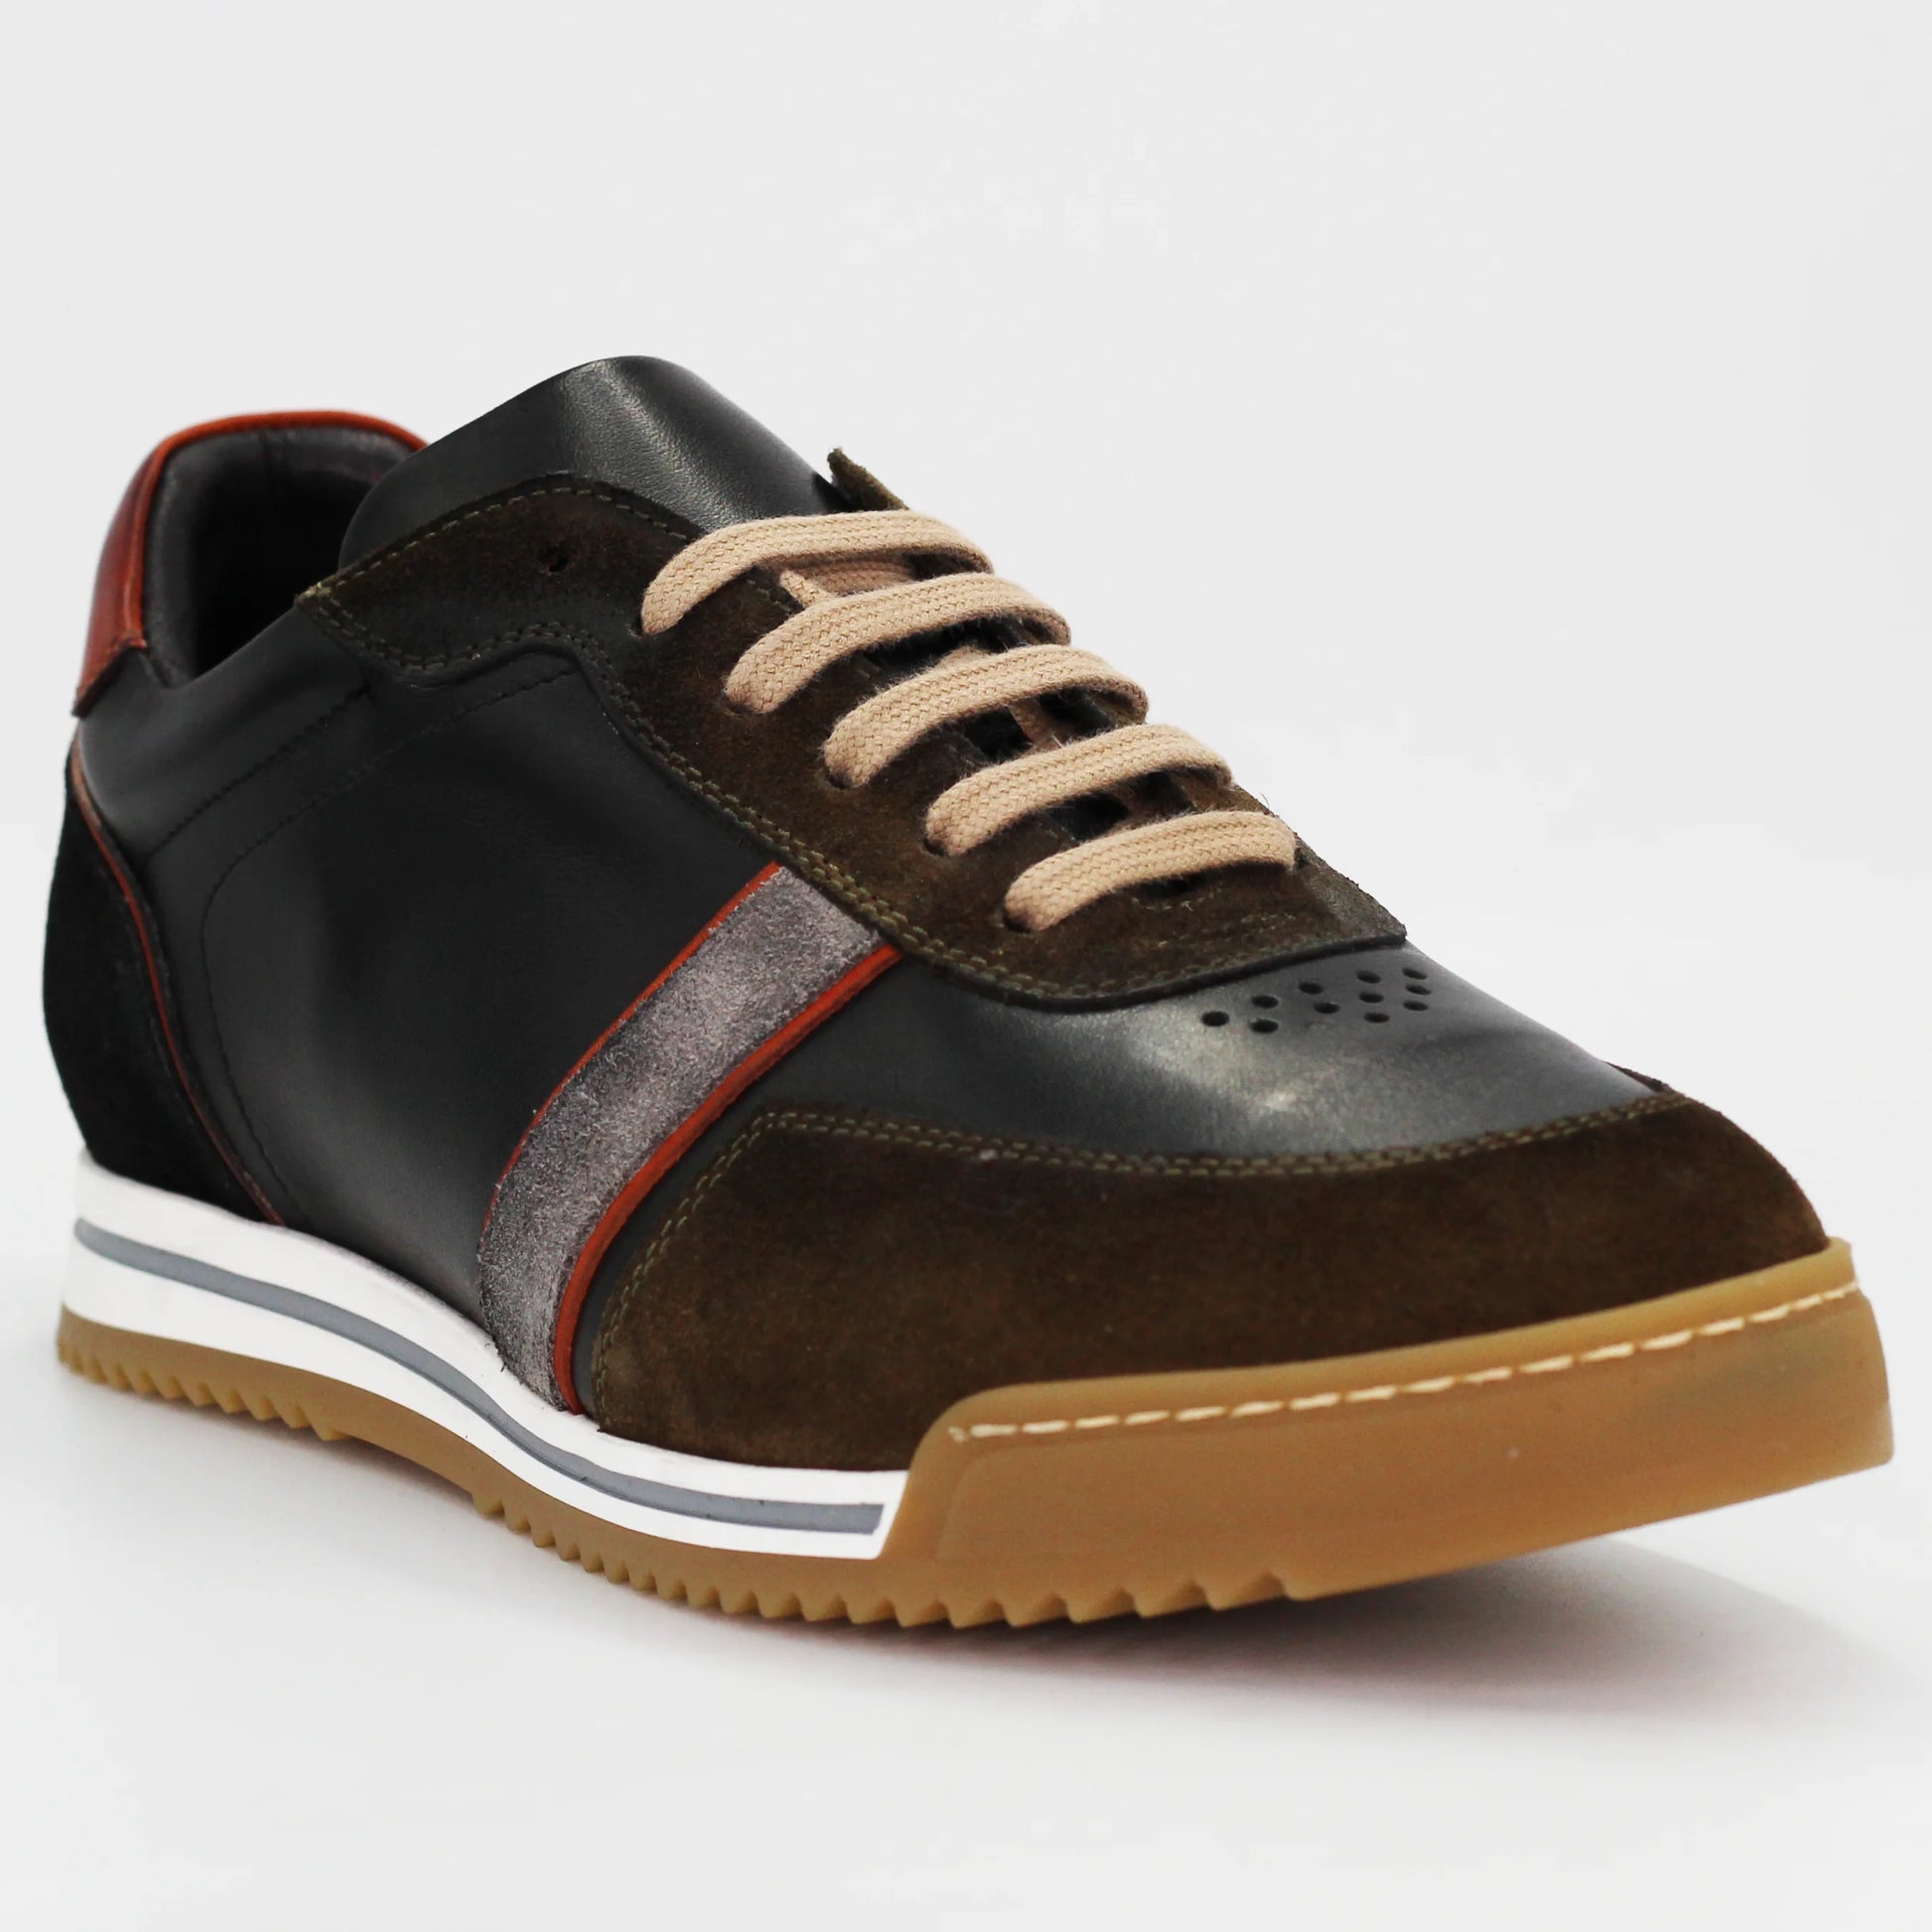 Shop Handmade Italian Leather sneaker in nero militare (BRU11860) or browse our range of hand-made Italian shoes in leather or suede in-store at Aliverti Cape Town, or shop online. We deliver in South Africa & offer multiple payment plans as well as accept multiple safe & secure payment methods.